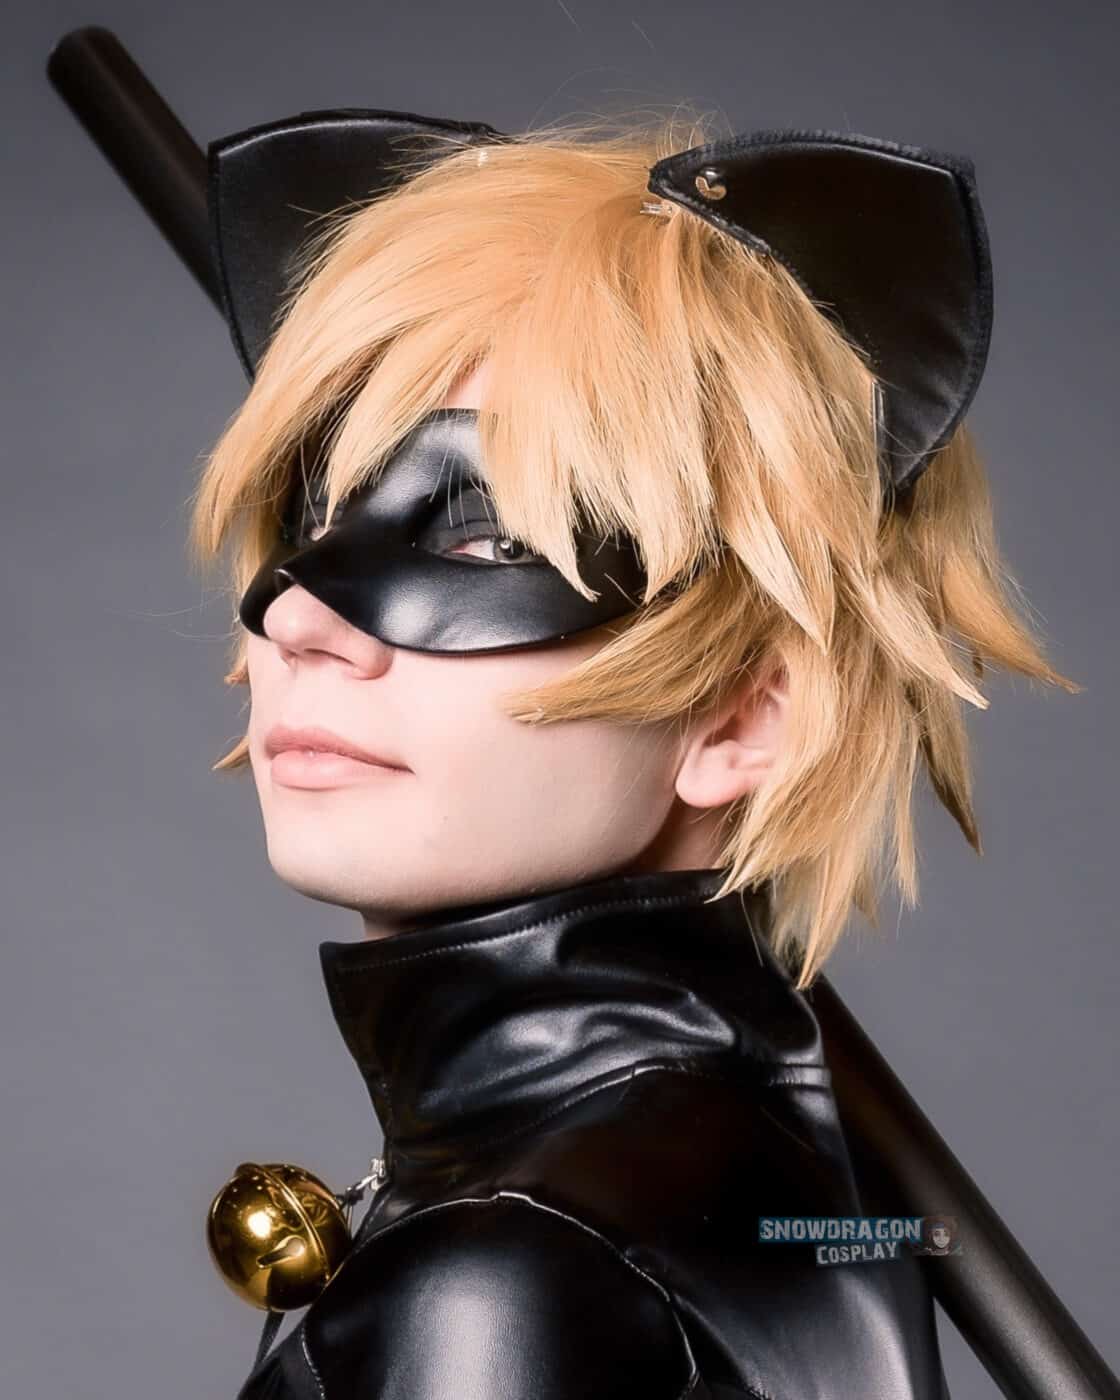 Find The Best Cosplay Talents & Models From A Trusted Platform